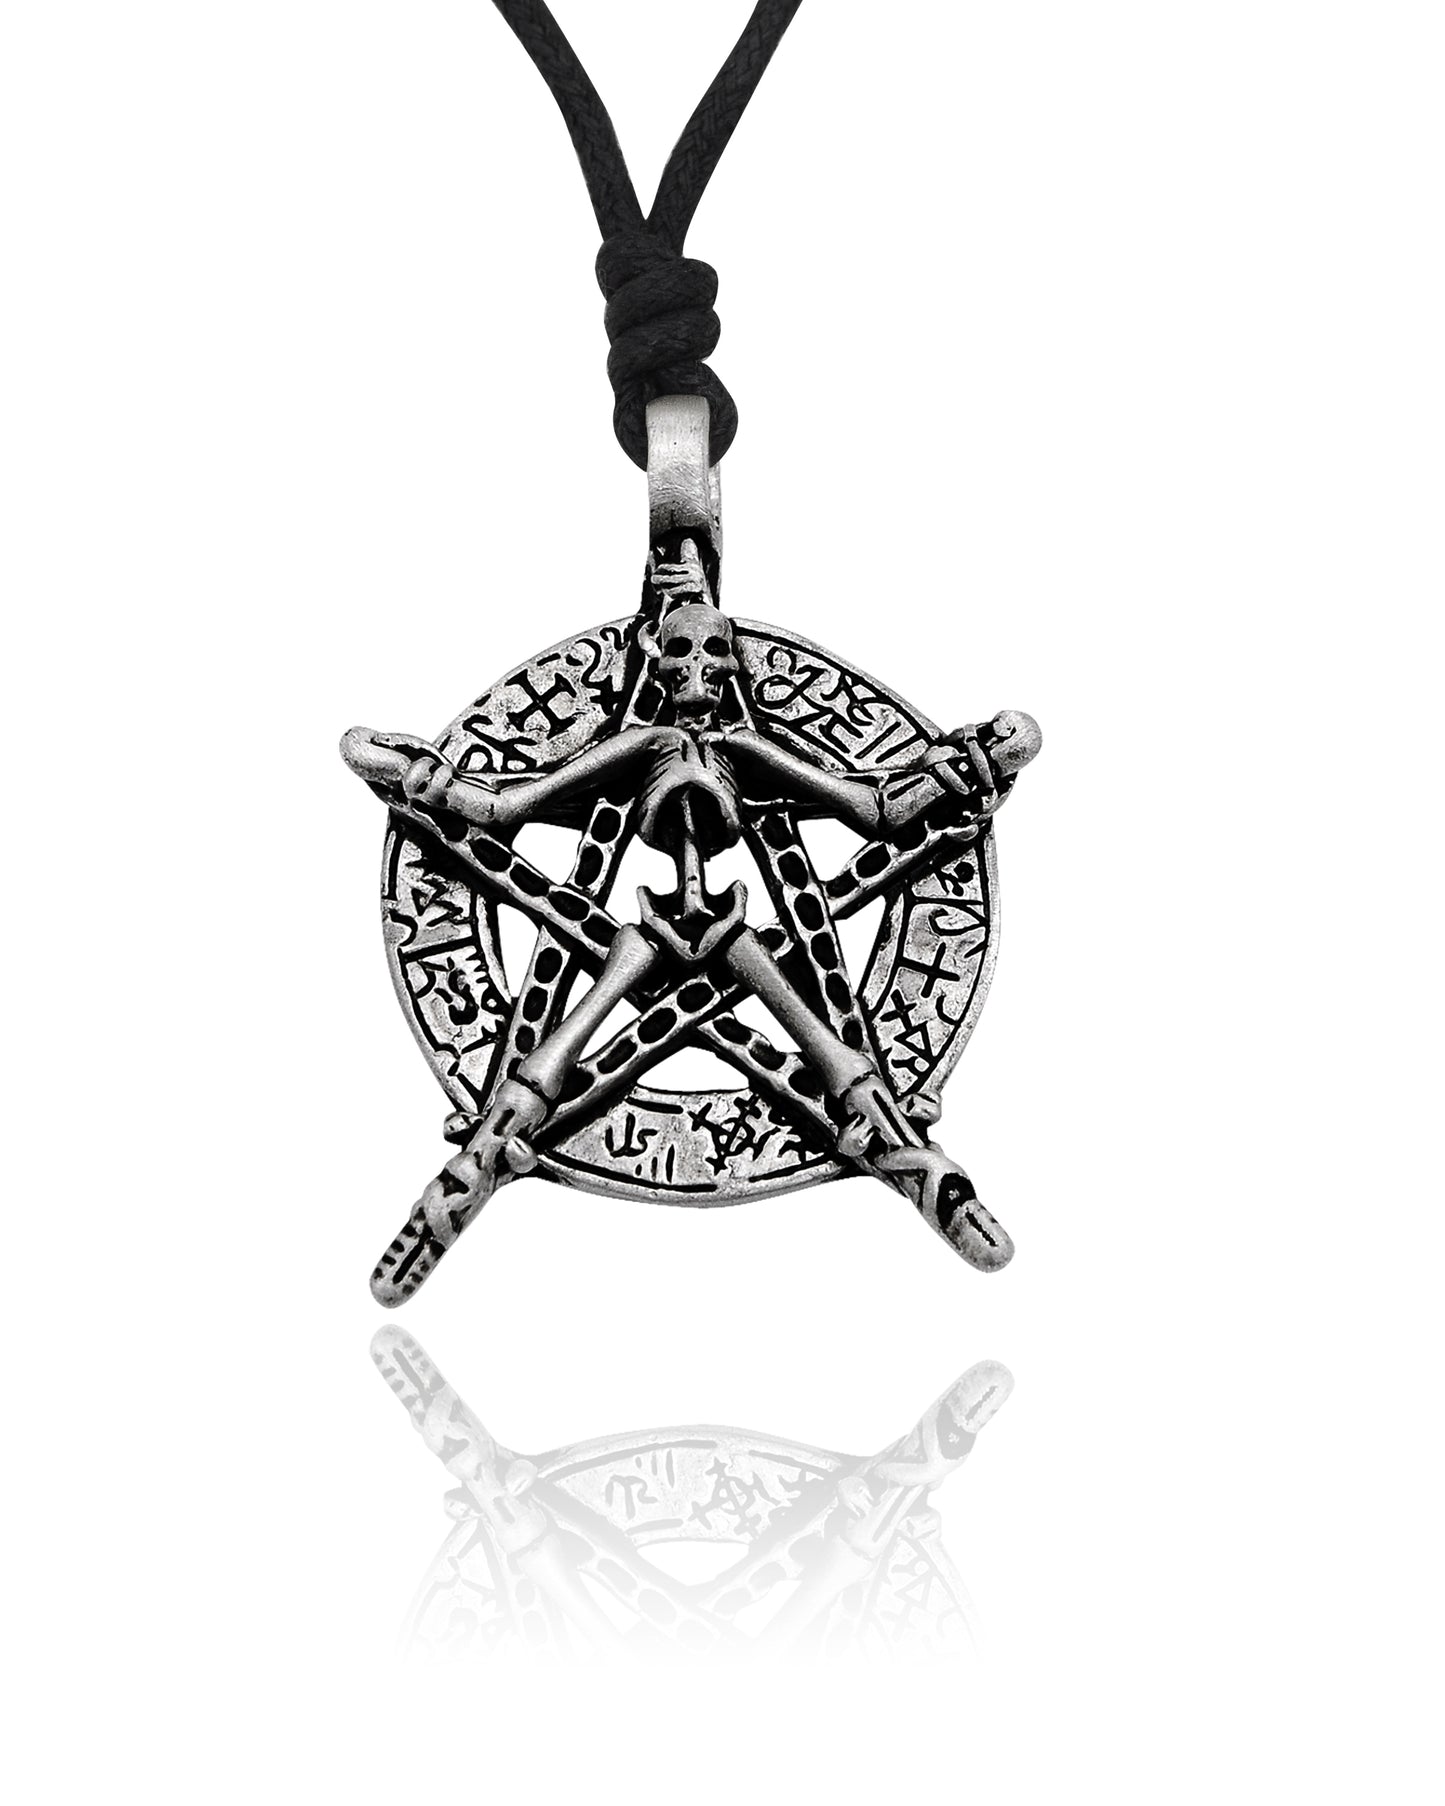 Skeleton Pentagram Gothic Silver Pewter Charm Necklace Pendant Jewelry With Cotton Cord